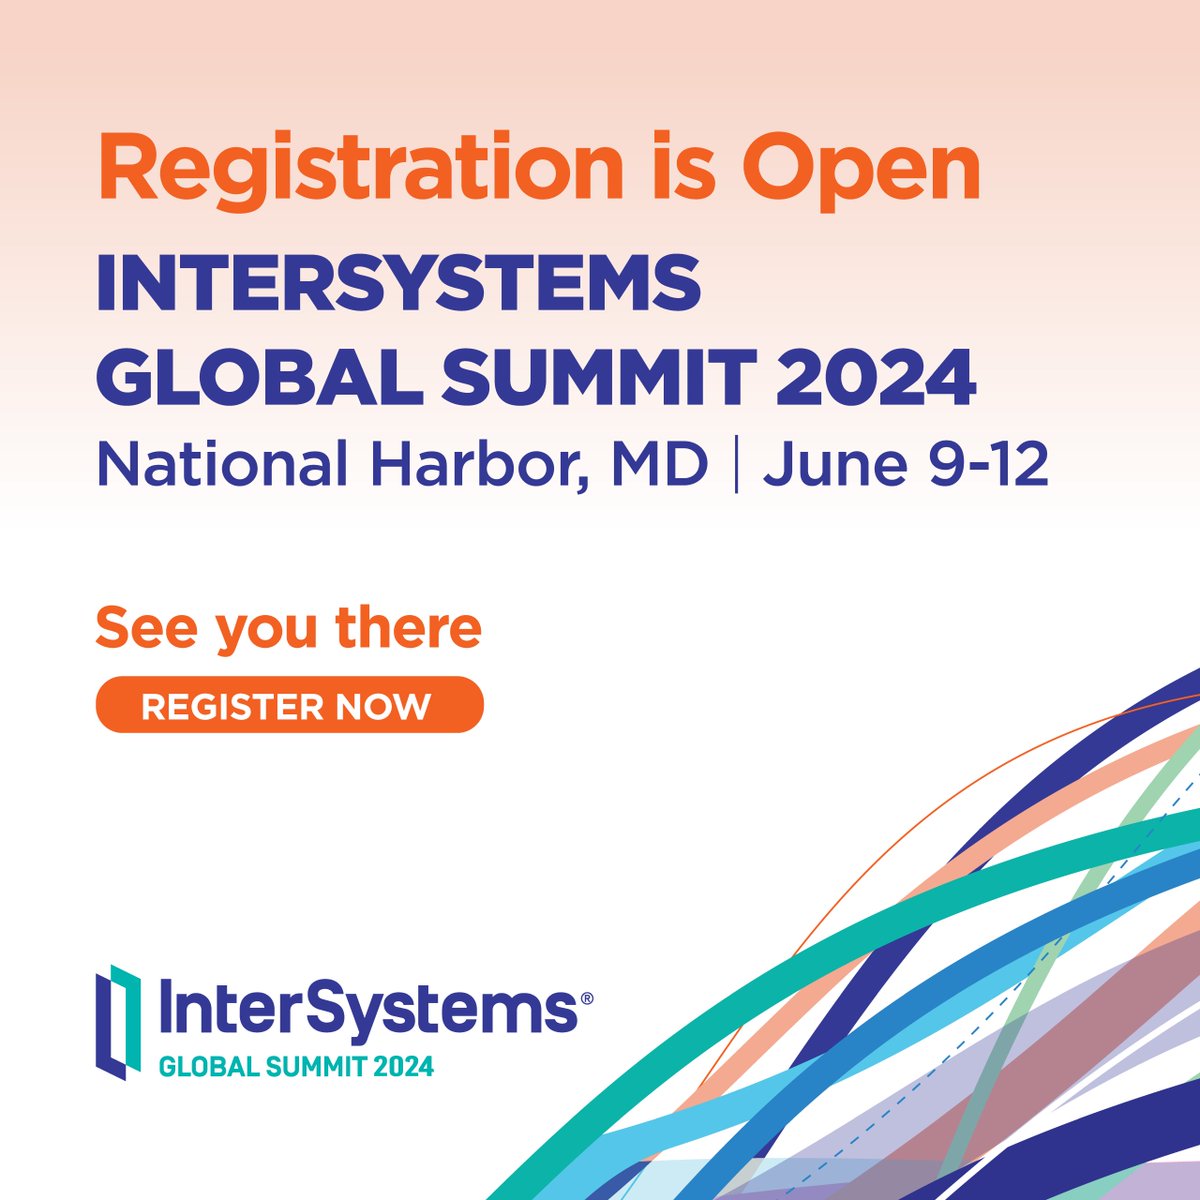 🔥It's that time again: InterSystems Global Summit is around the corner and registration is live! Discover how to leverage InterSystems technology for innovation in healthcare, finance, supply chain, and government. This year features 'The Art of the Possible' with a Healthcare…